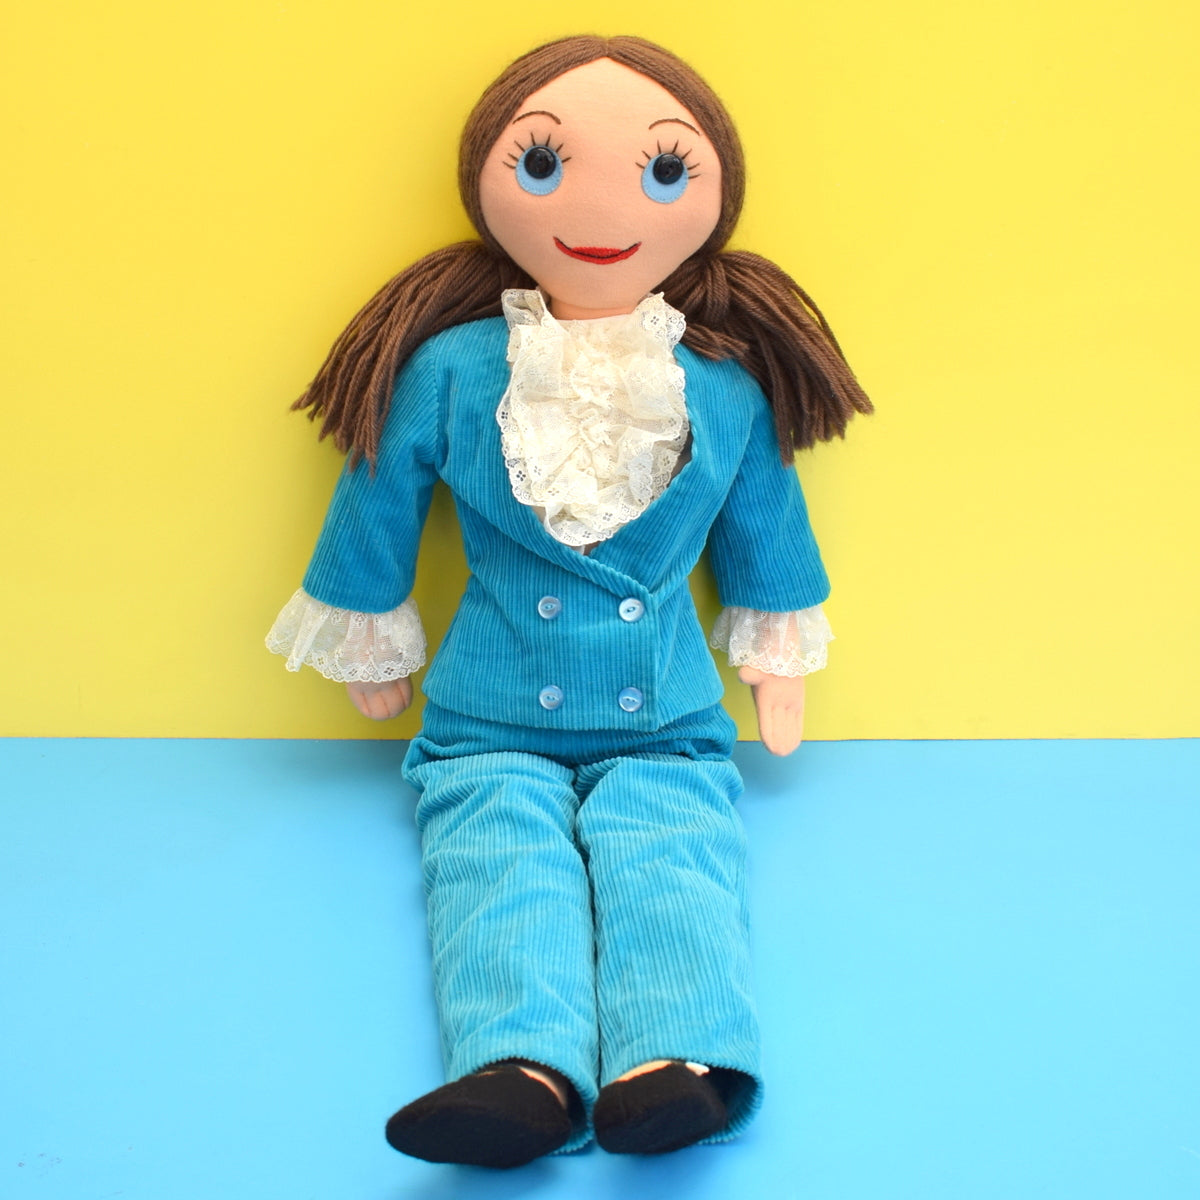 Vintage 1970s Large Fabric Doll In Turquoise Suit - Austin Powers Style